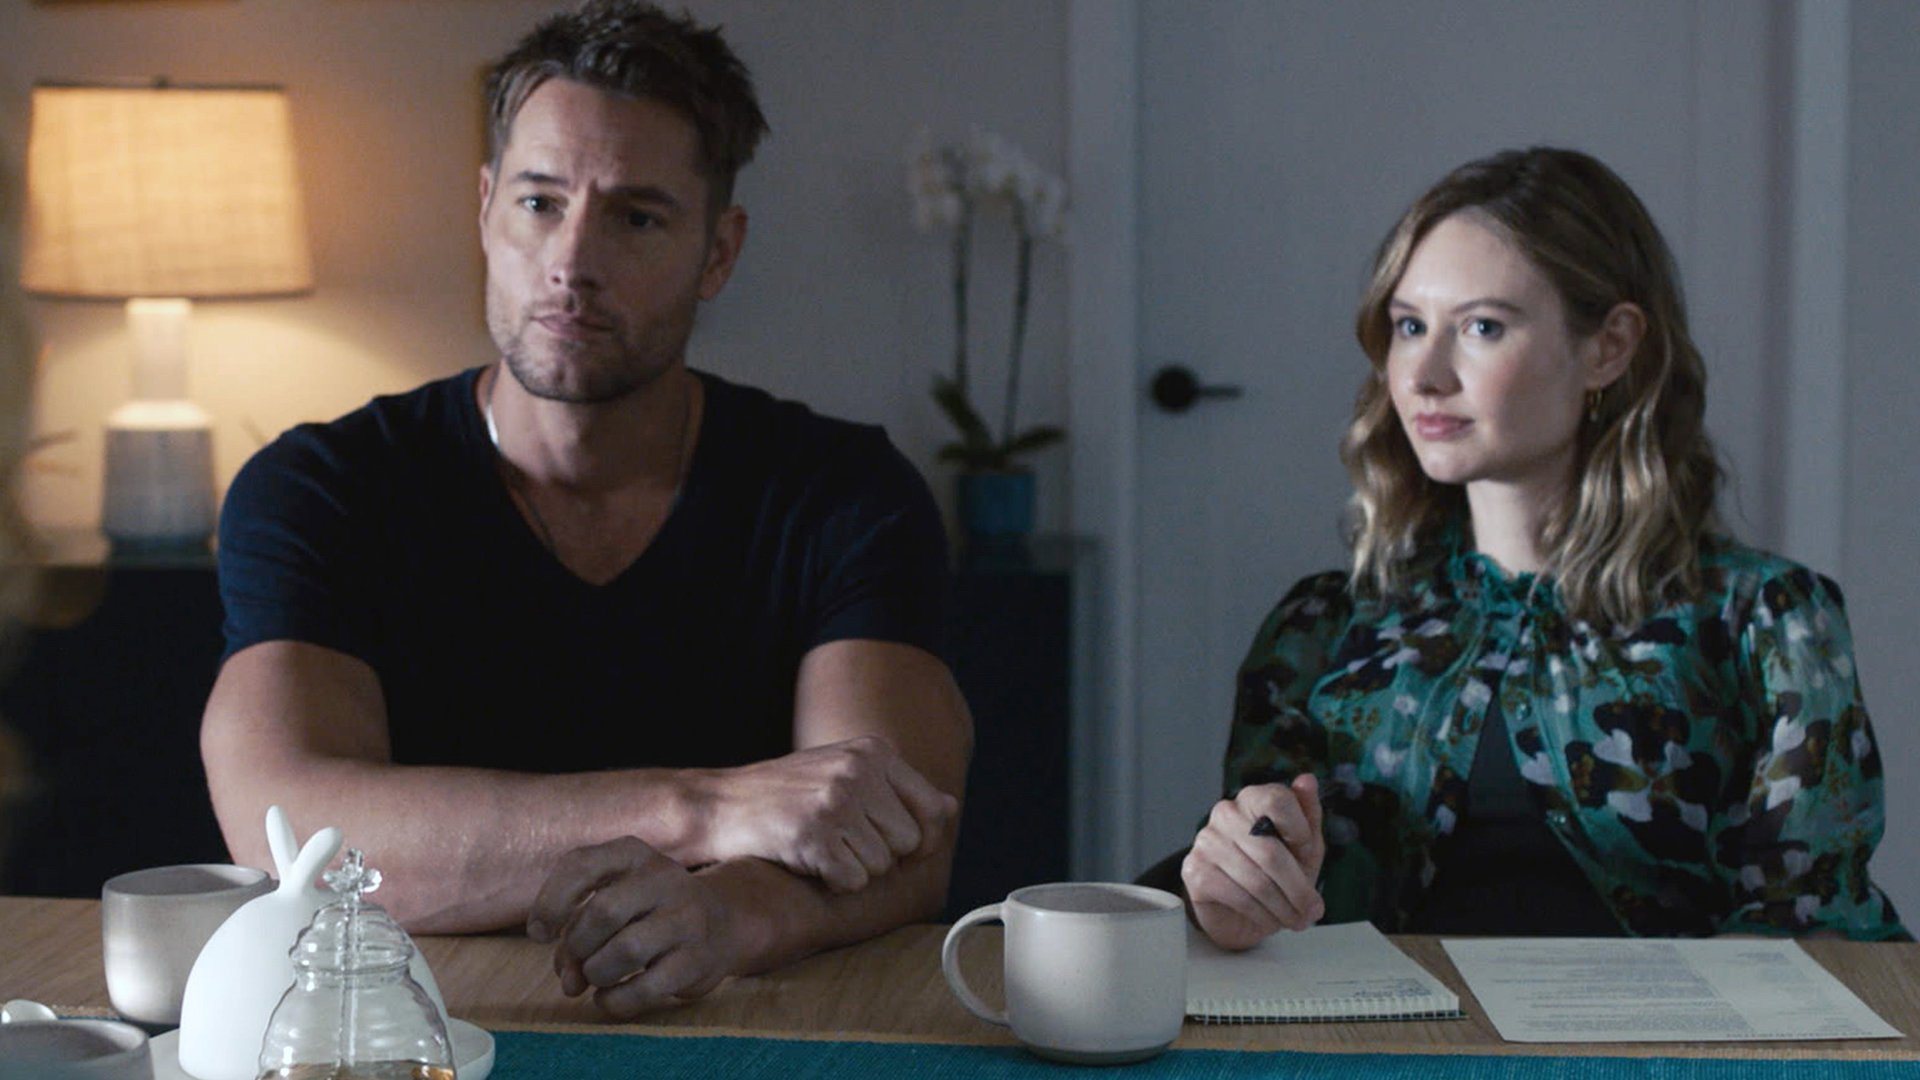 Justin Hartley as Kevin and Caitlin Thompson as Madison meeting potential nannies for the twins on ‘This Is Us’ Season 5 Episode 5